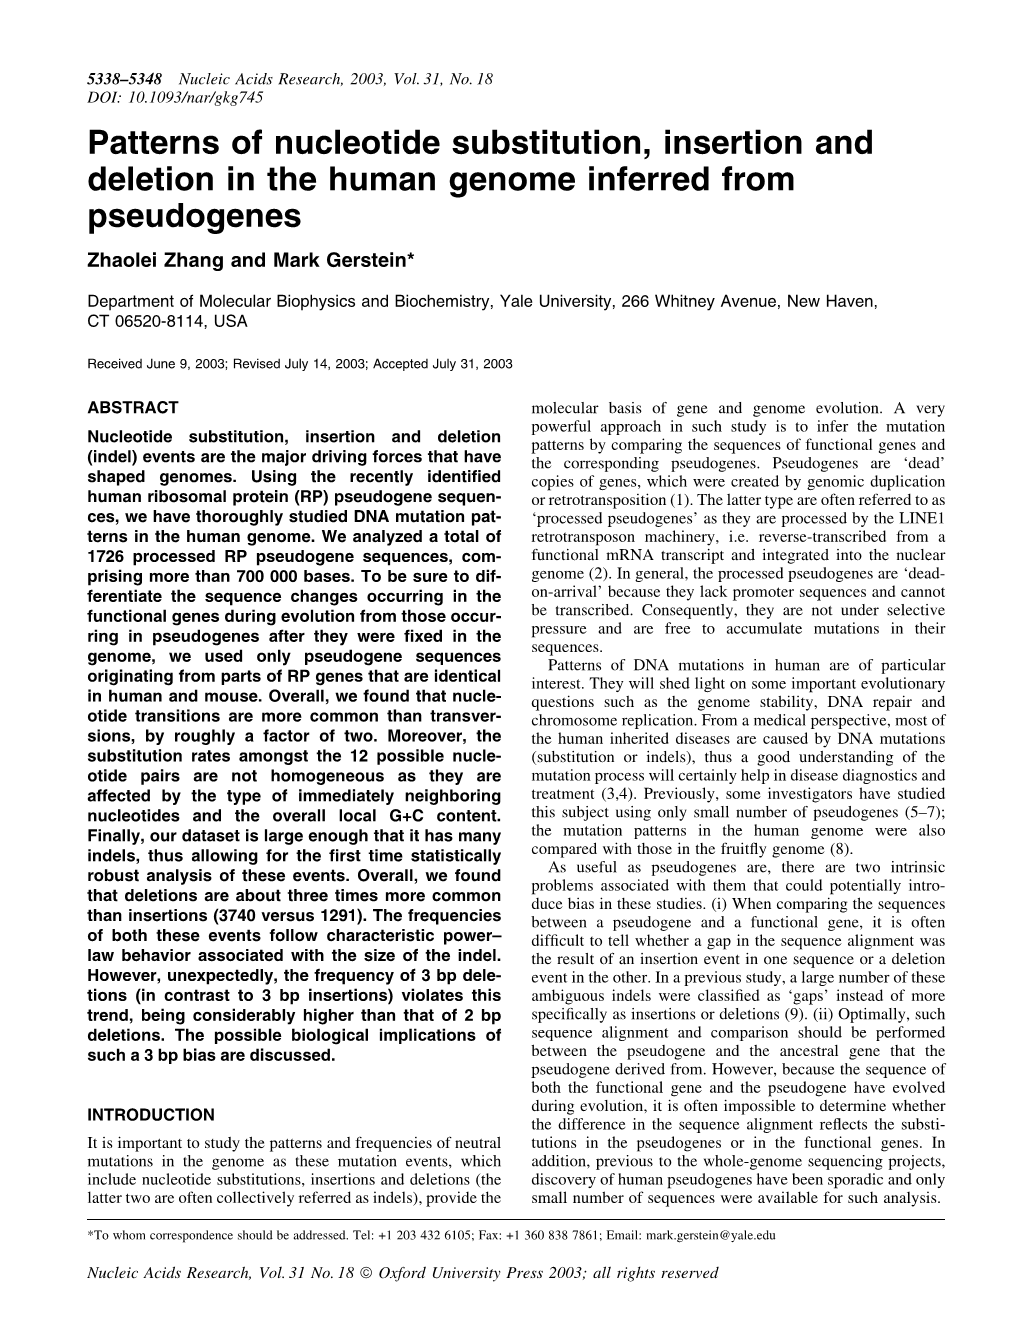 Patterns of Nucleotide Substitution, Insertion and Deletion in the Human Genome Inferred from Pseudogenes